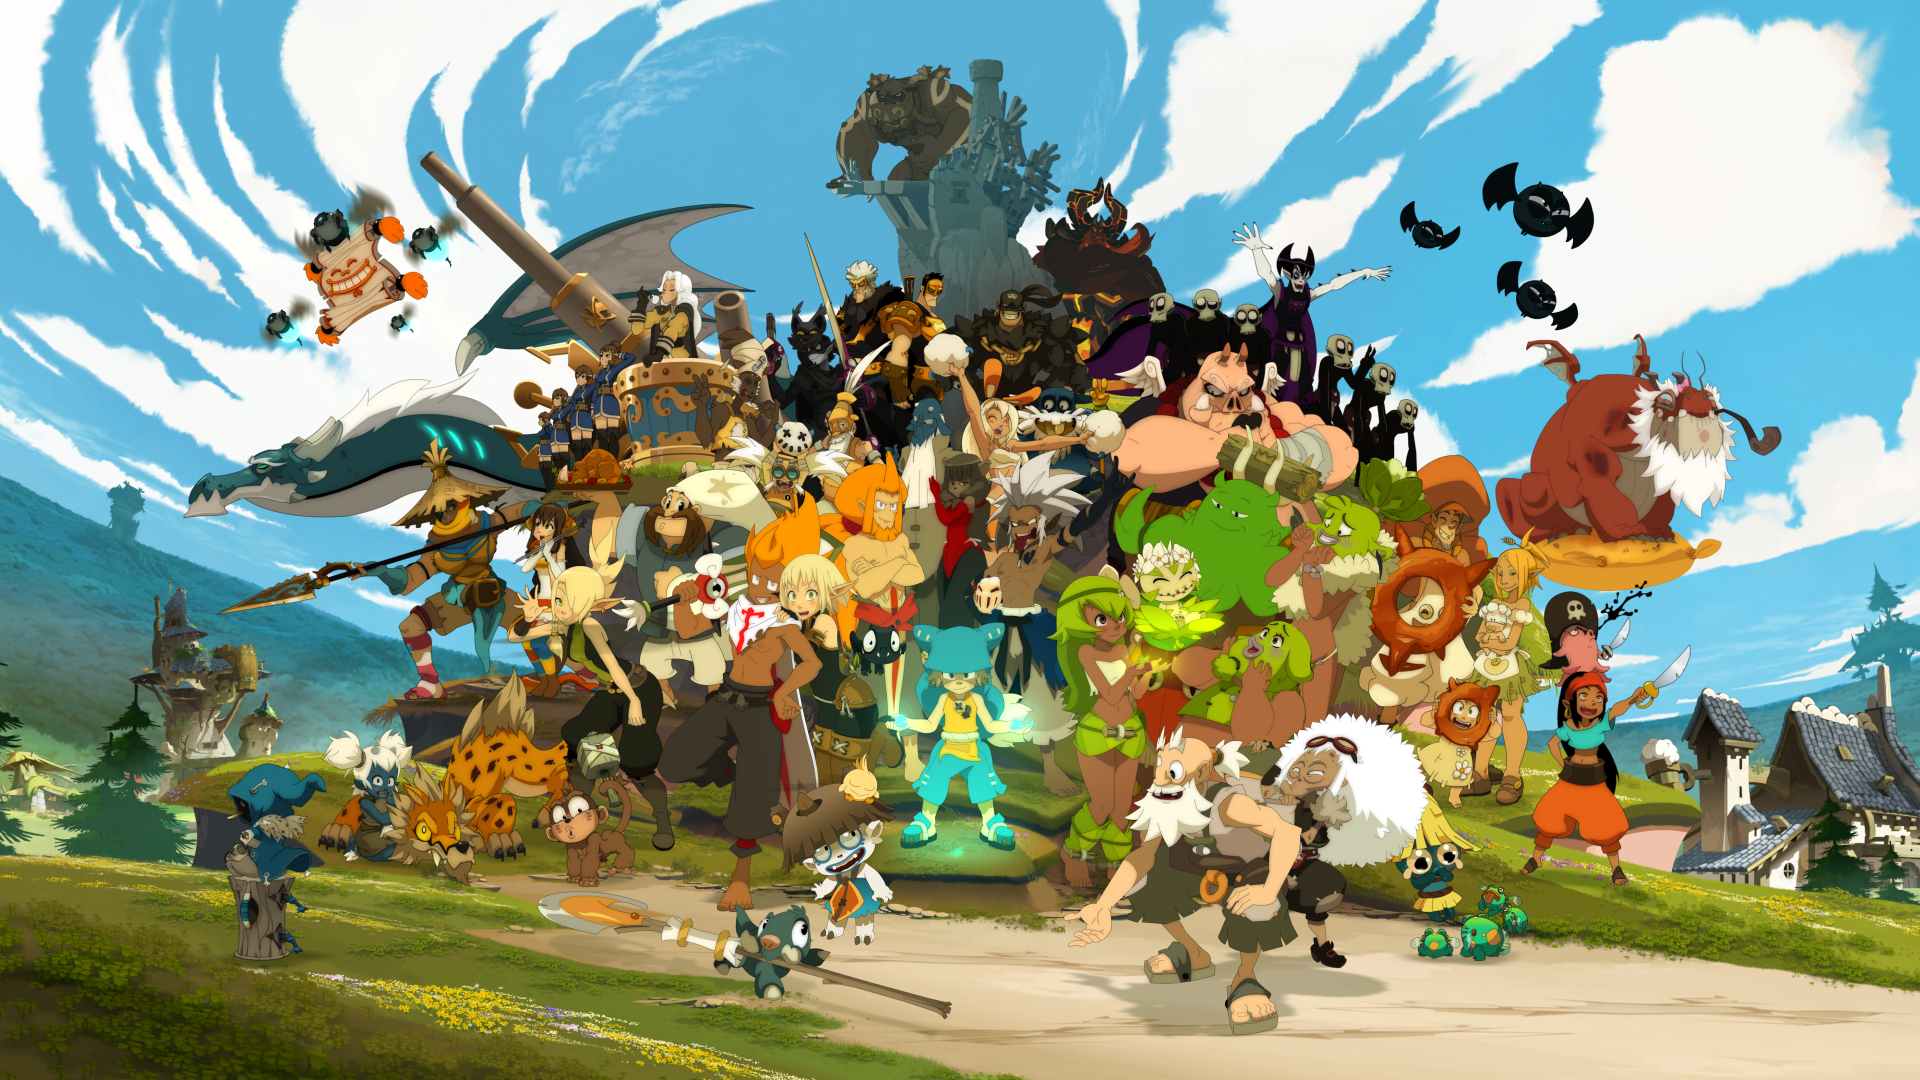 Wakfu Backgrounds, Compatible - PC, Mobile, Gadgets| 1920x1080 px